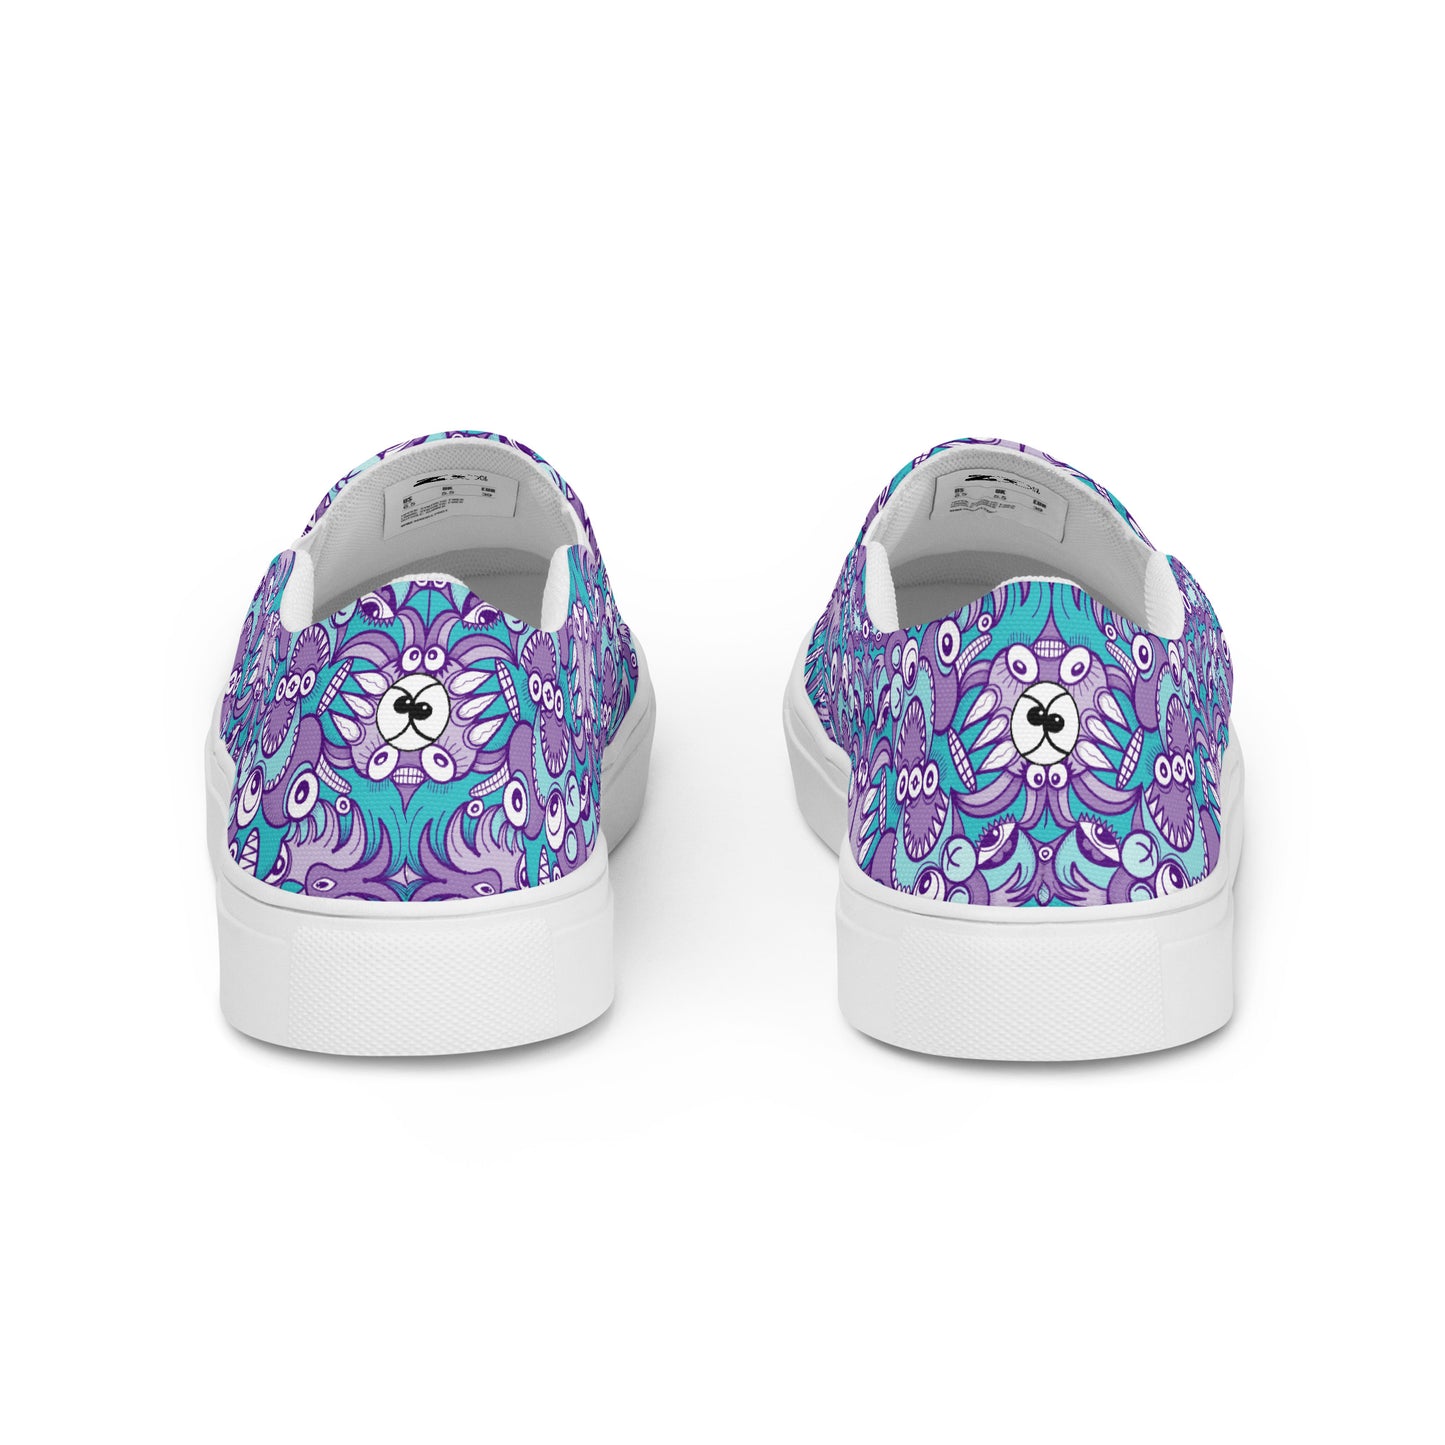 Planet 5: Aquatic Creatures from the Doodles of the Galaxy - Women’s slip-on canvas shoes. Back view